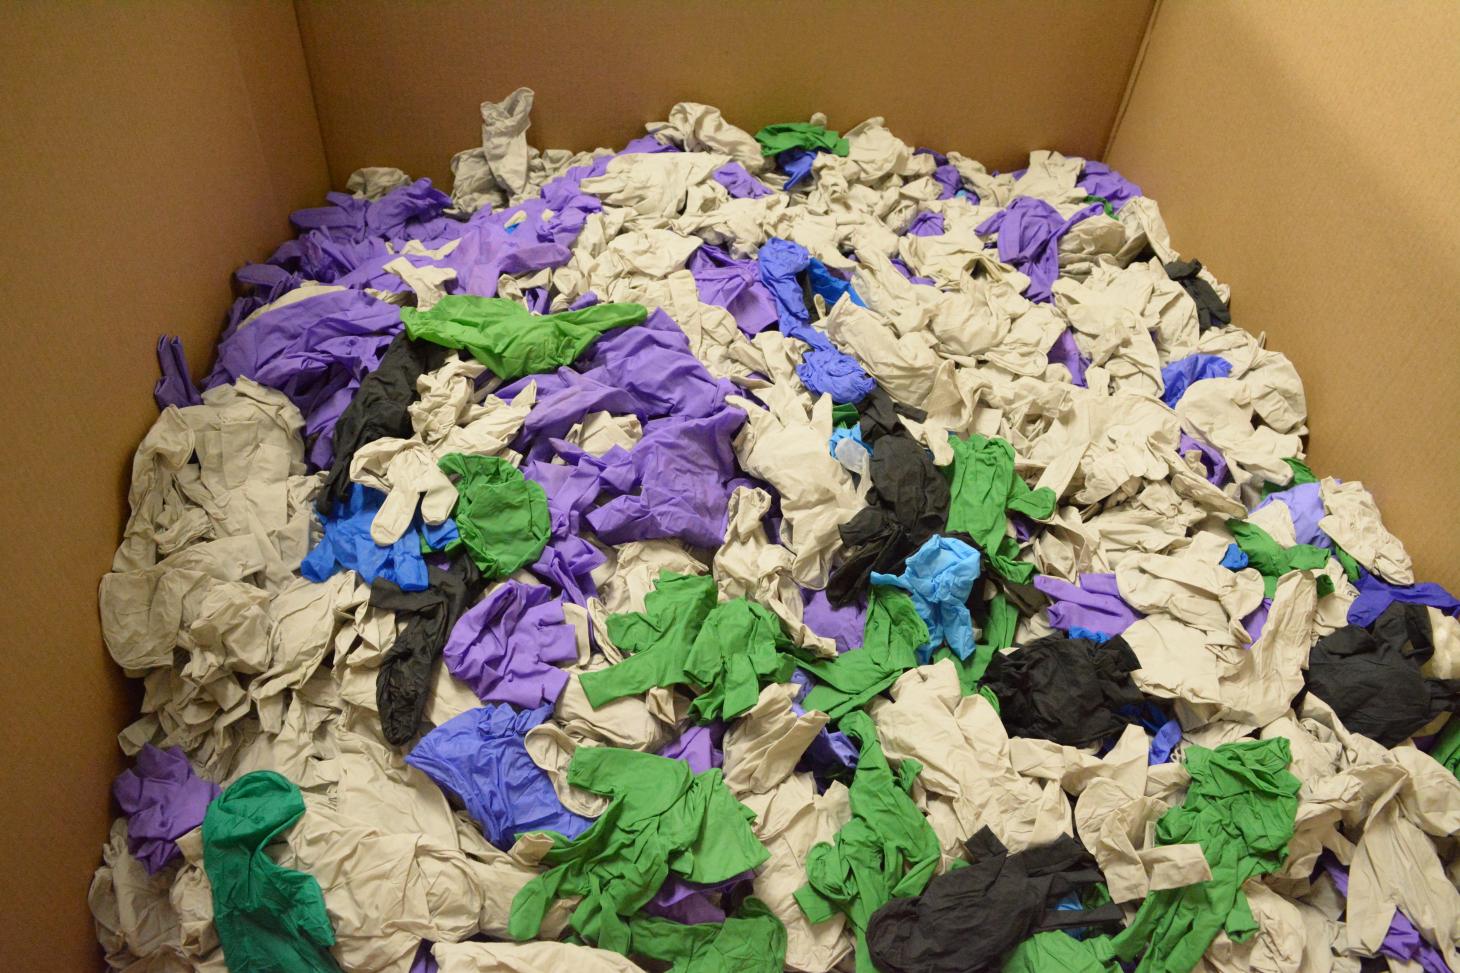 Box filled with disposable plastic gloves